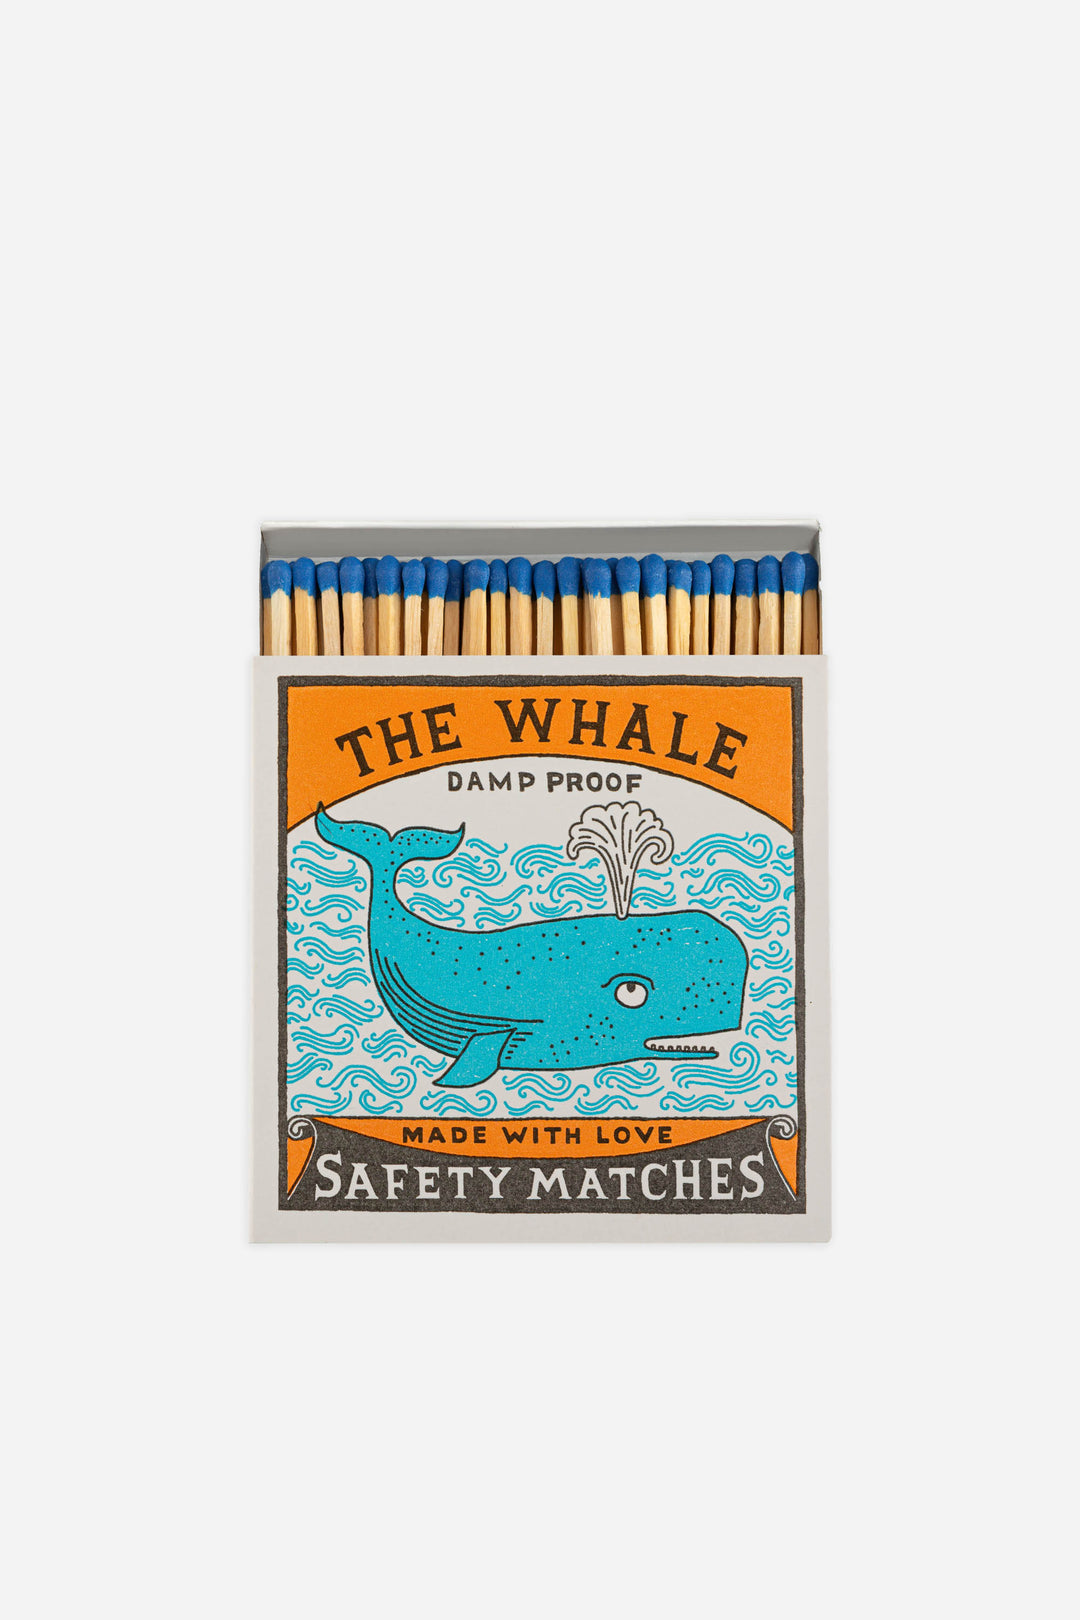 Matches / The Whale